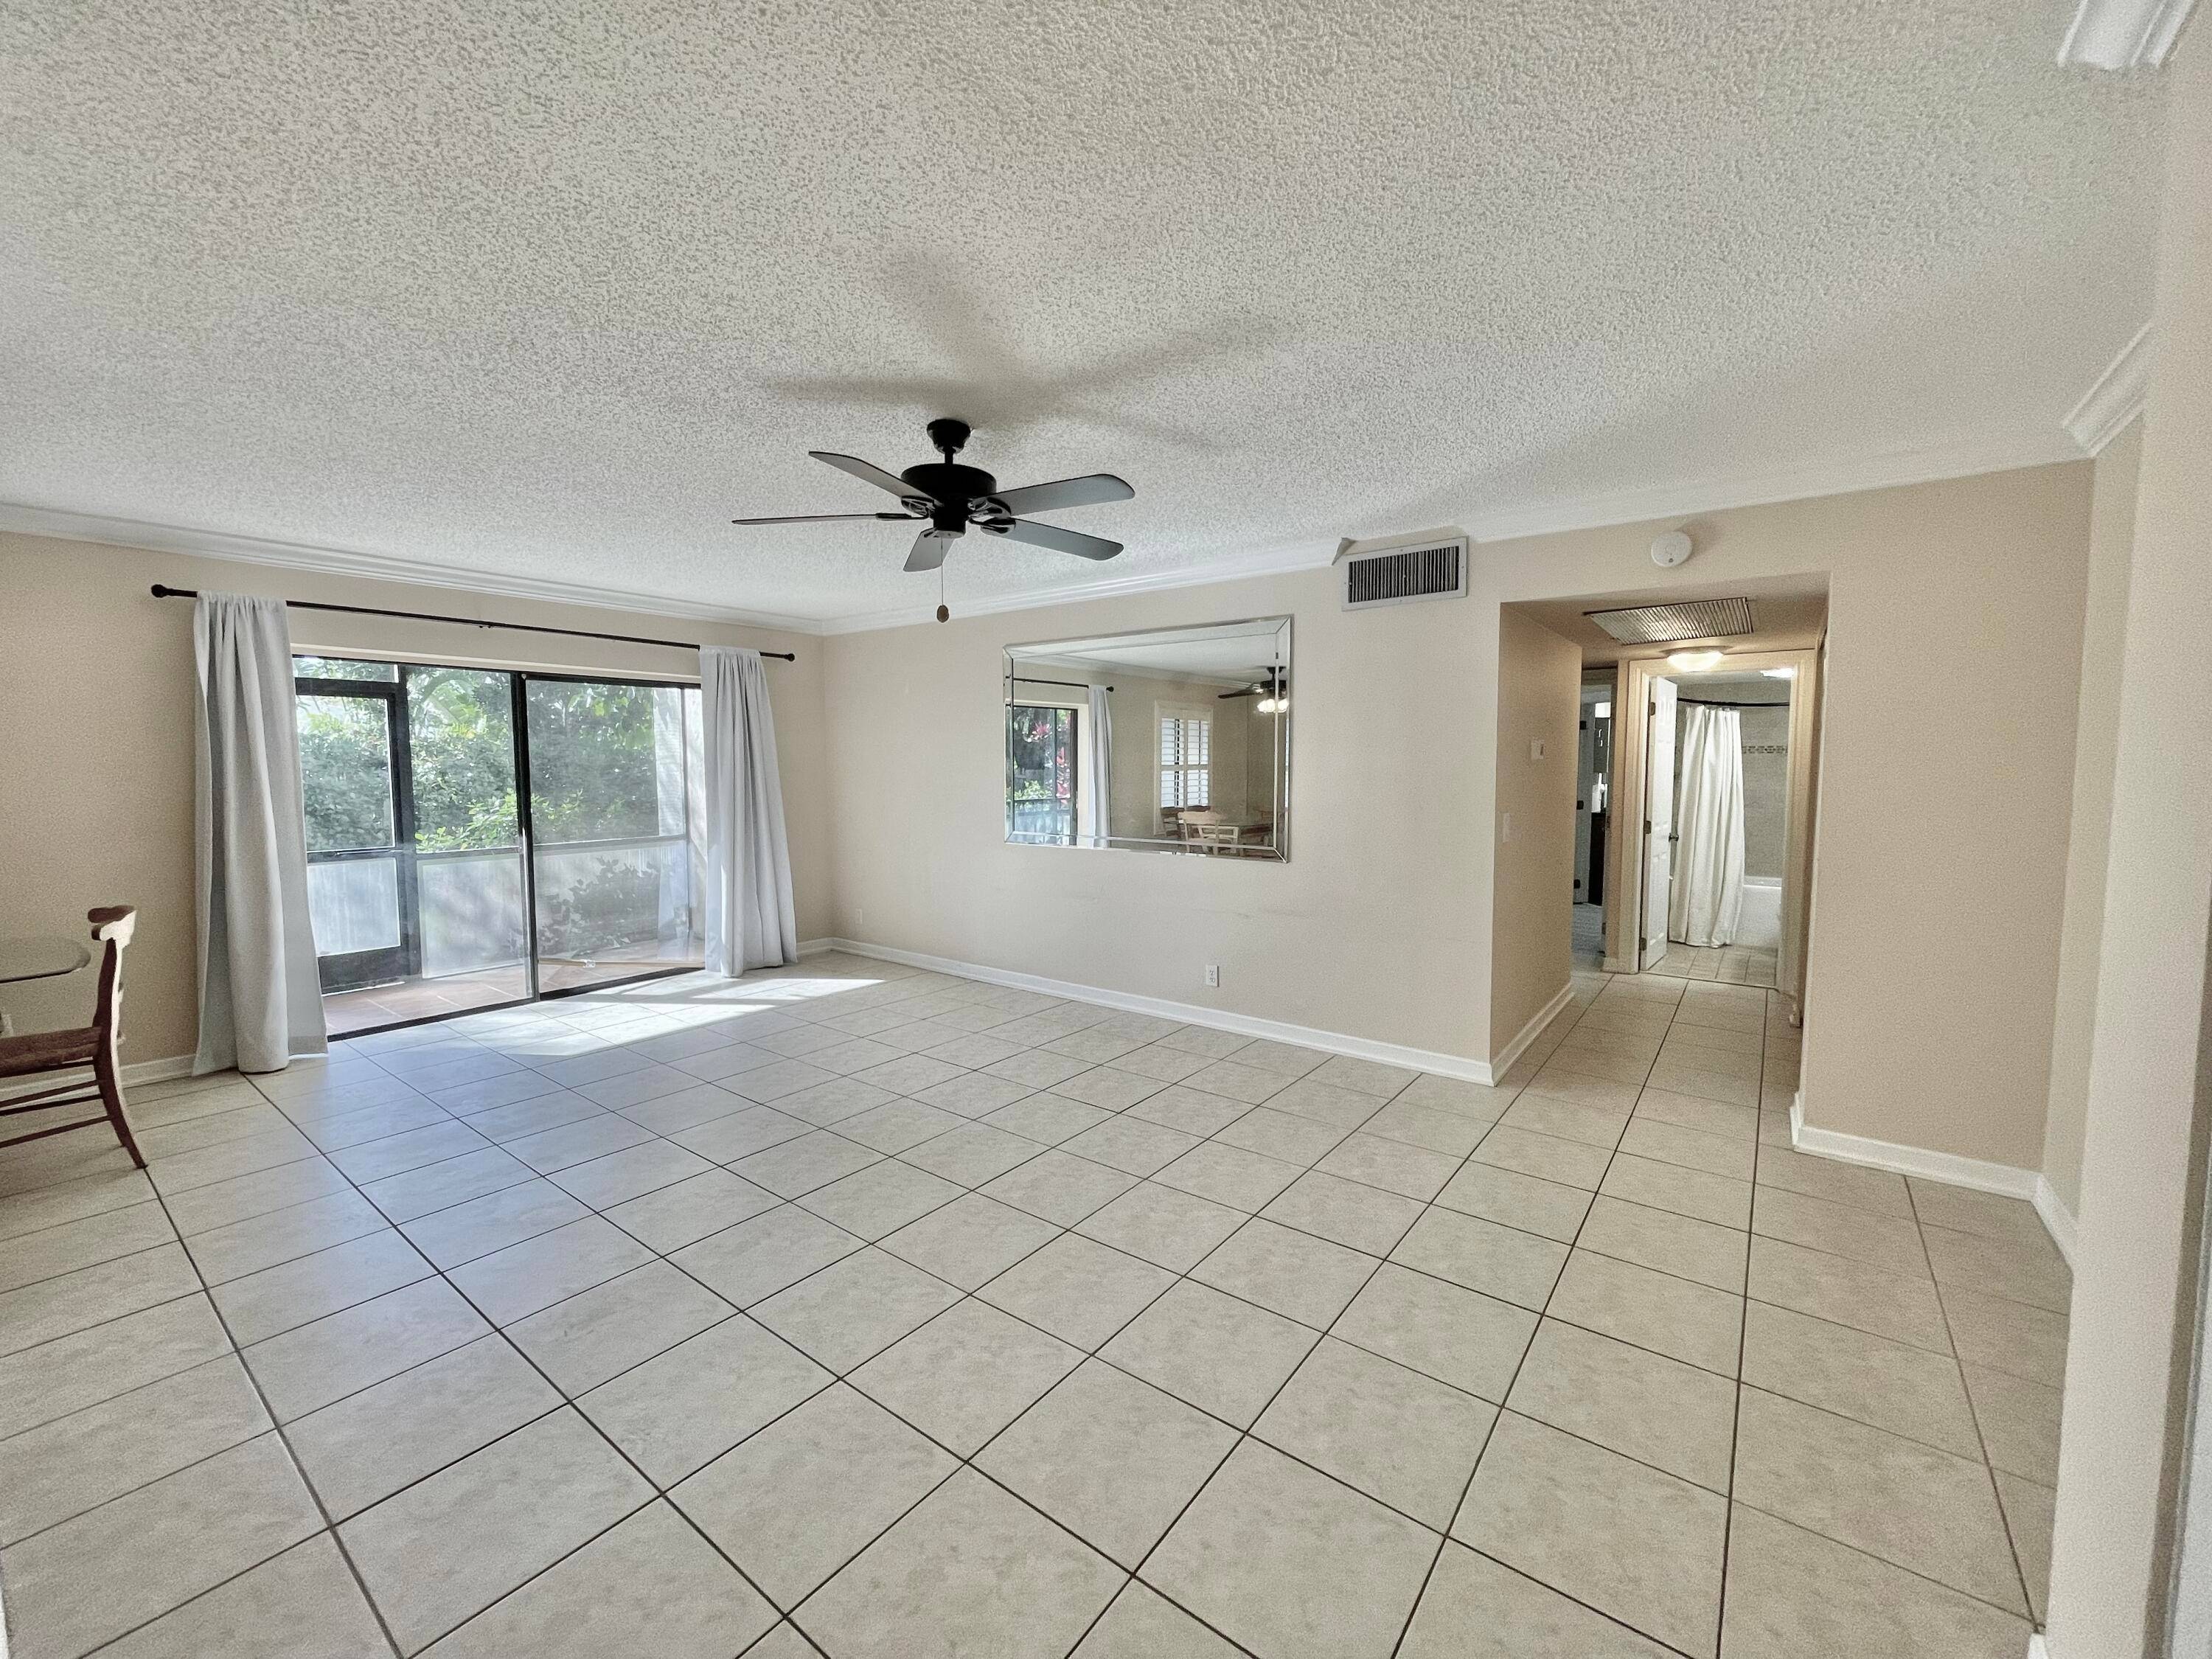 Updated and well maintained 2 2 close to the beach and everything in Tequesta and Jupiter.